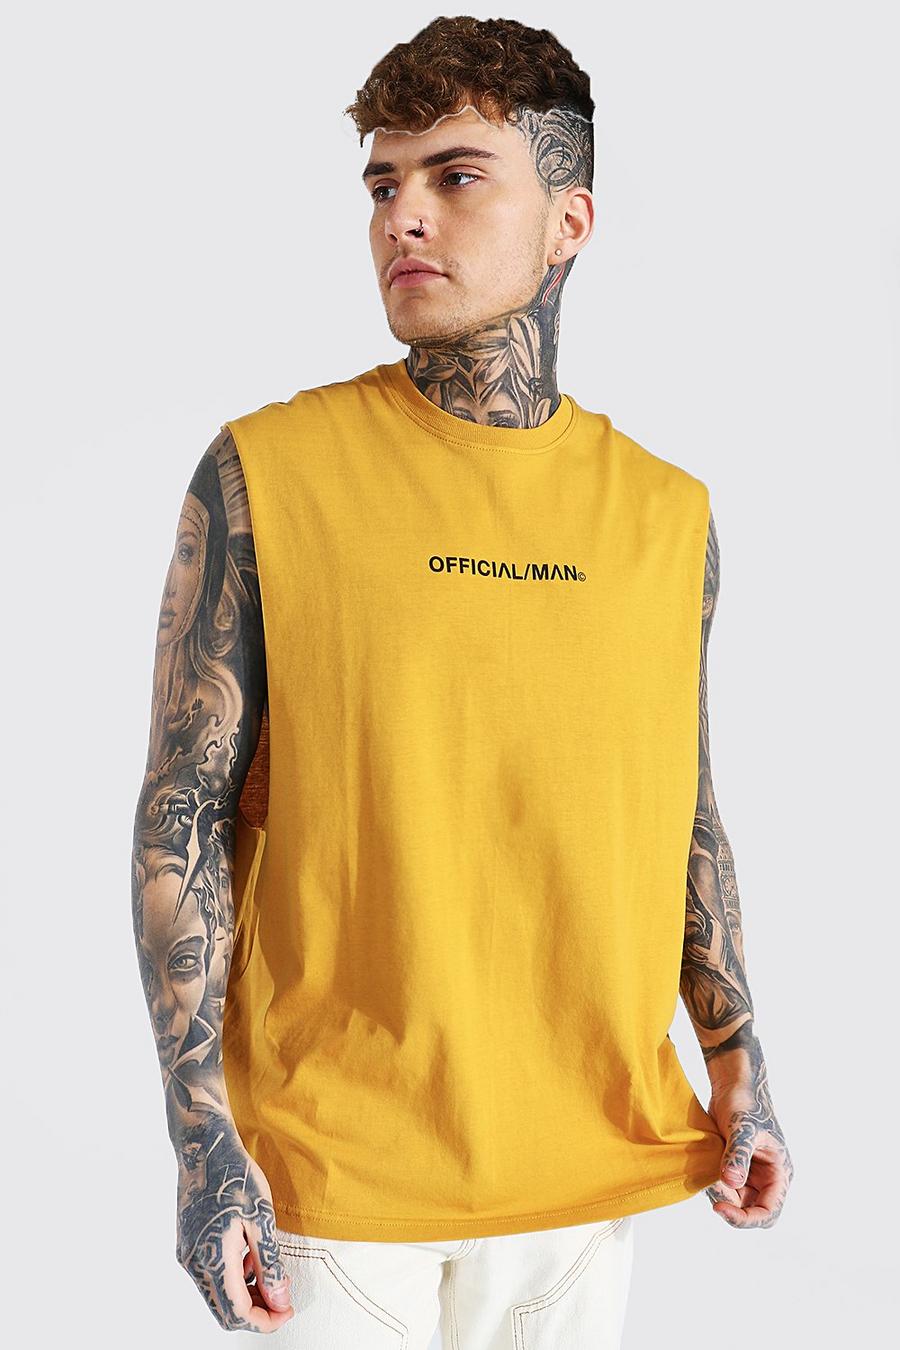 T-shirt sans manches oversize - Official MAN, Mustard gelb image number 1